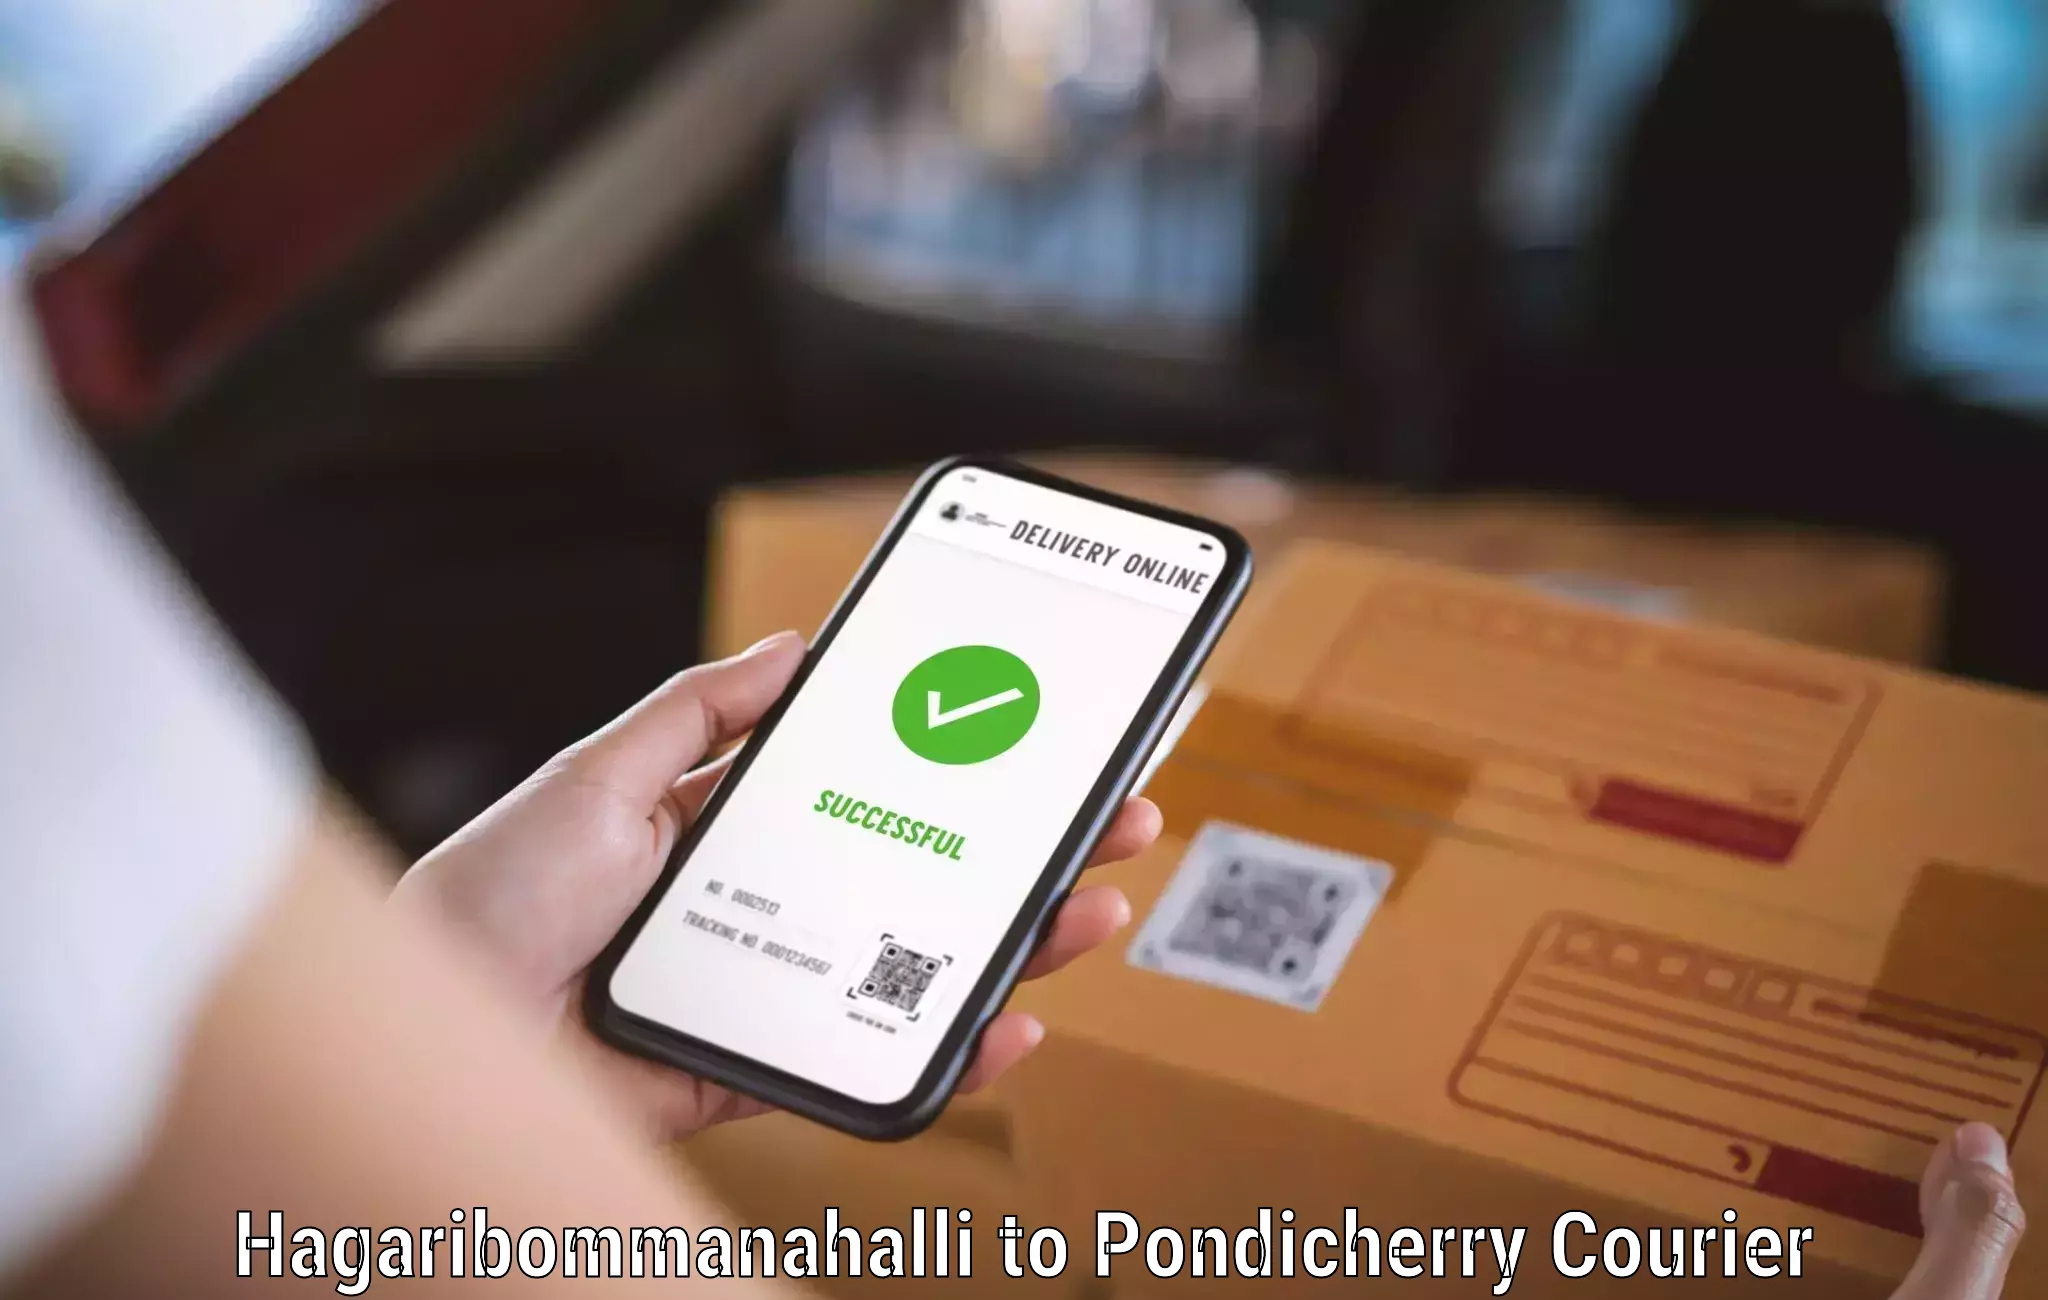 State-of-the-art courier technology Hagaribommanahalli to Pondicherry